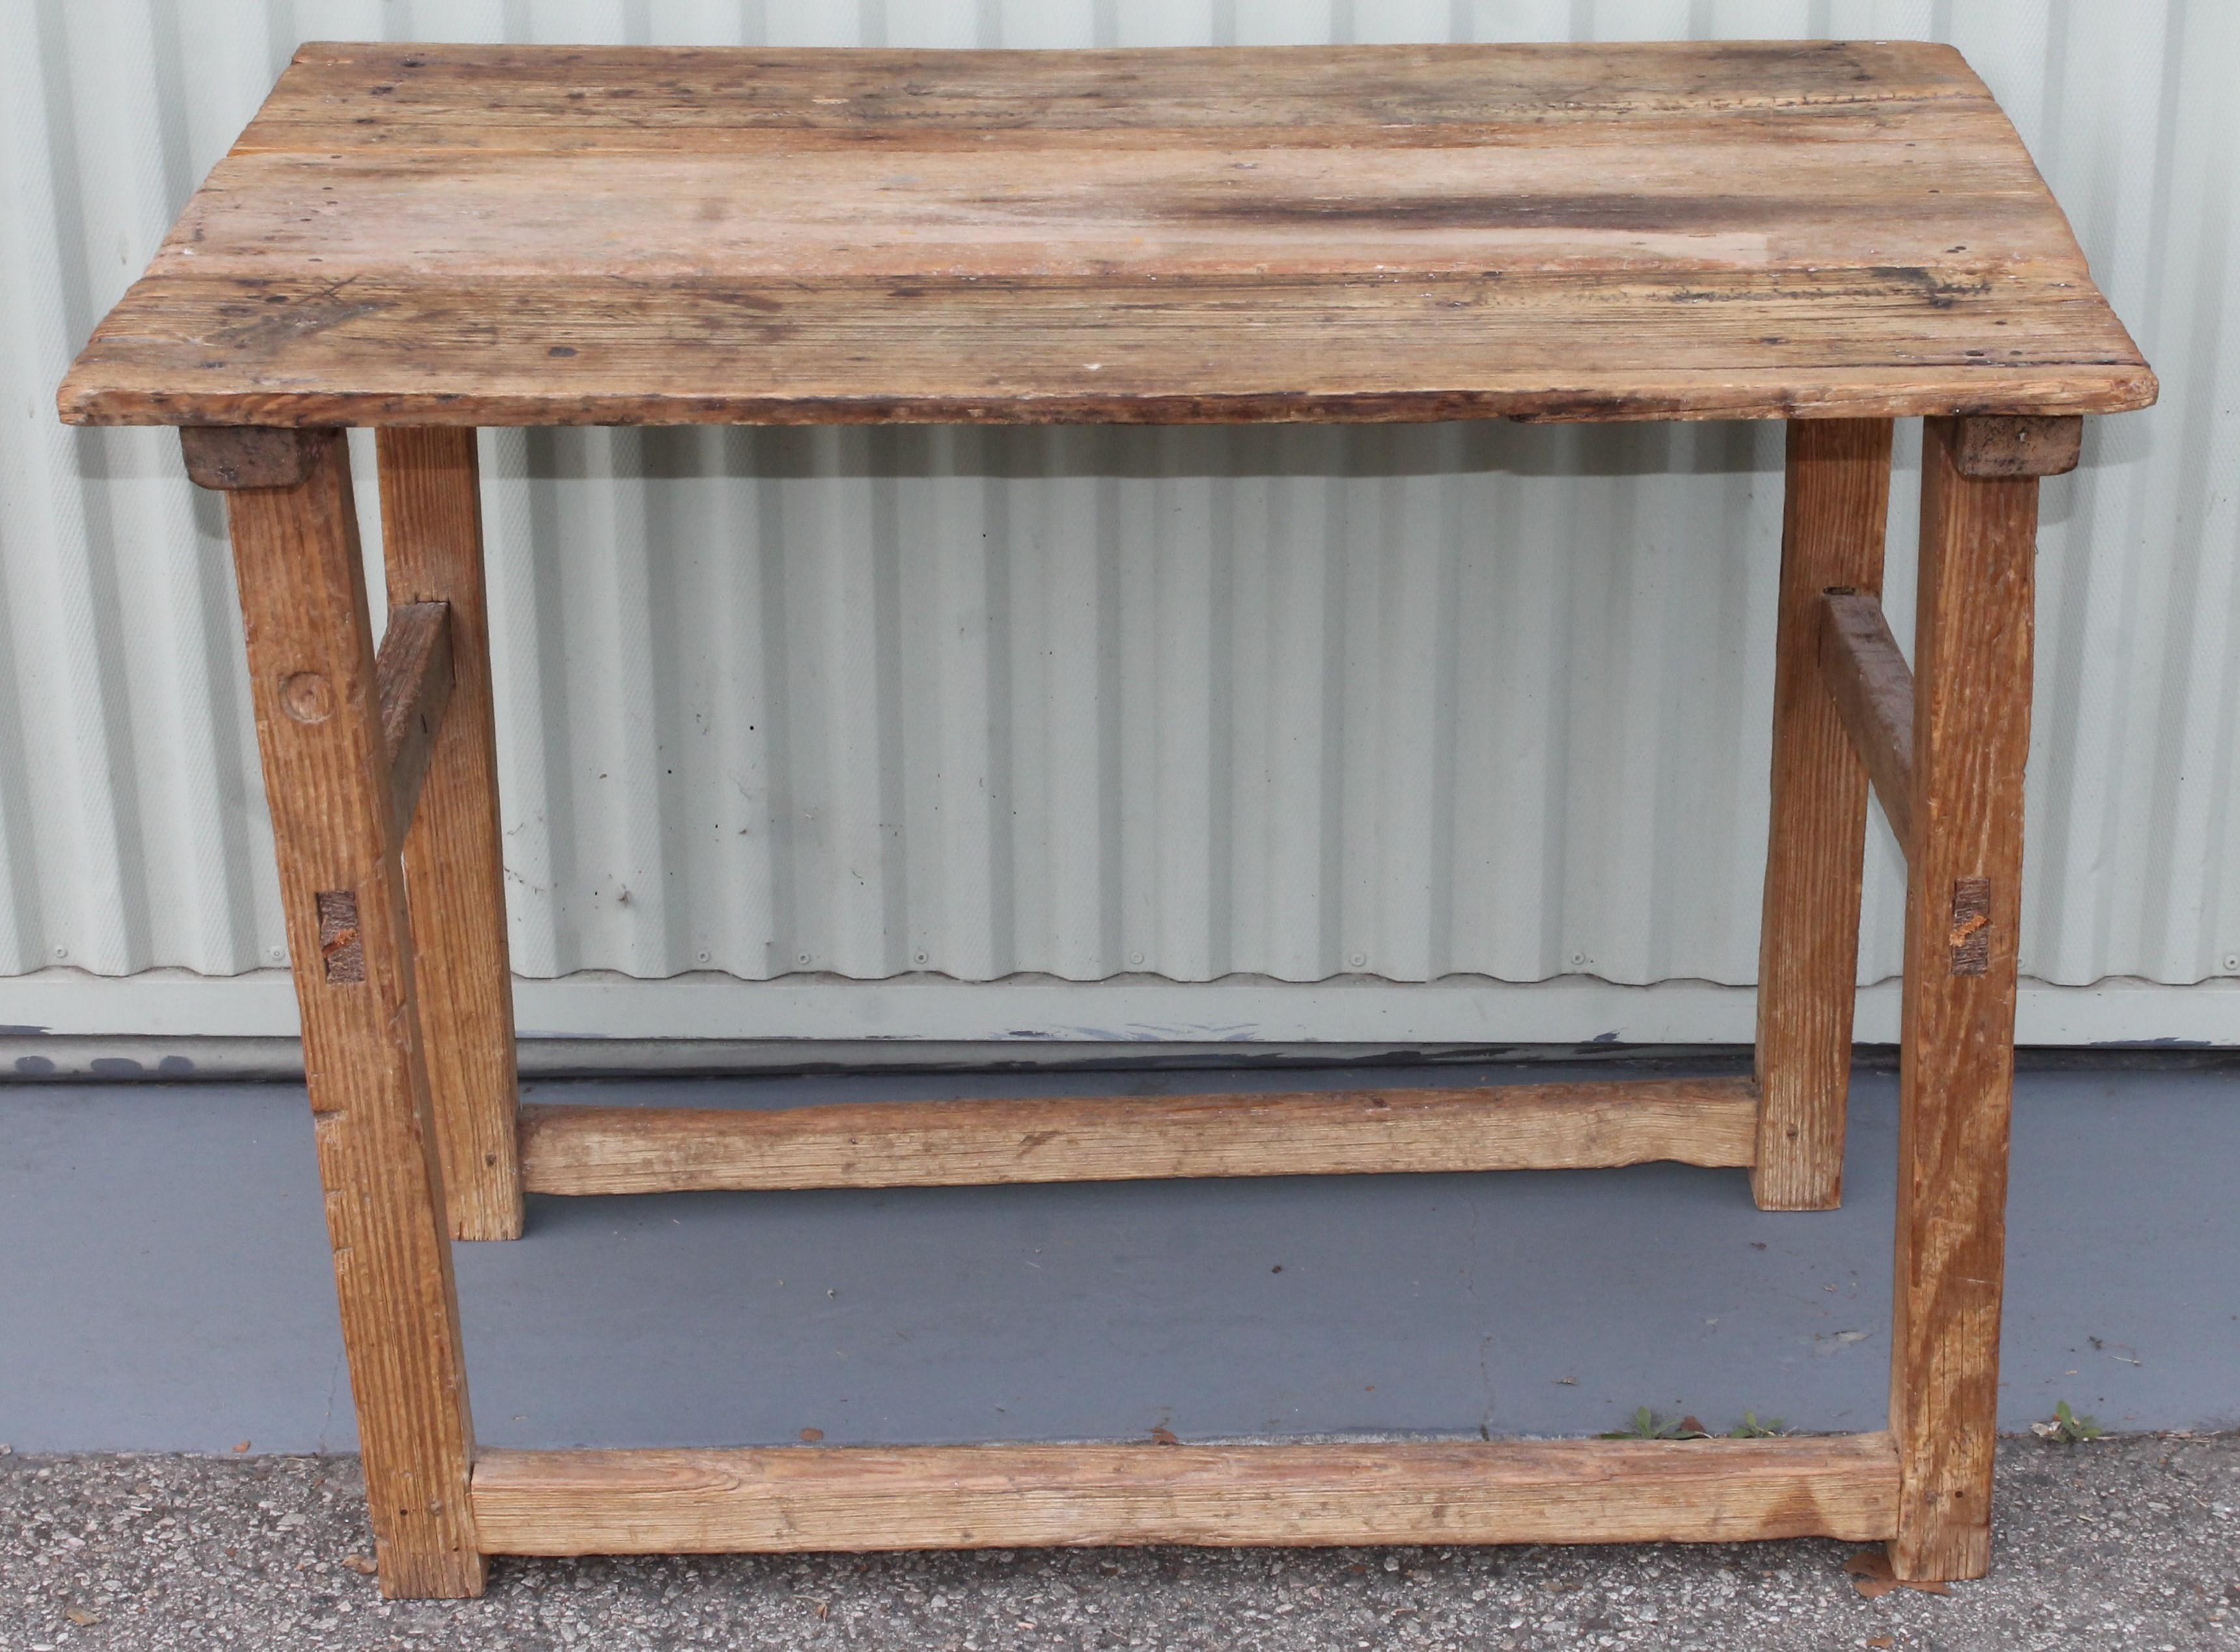 This folky handmade Mexican farm or work table is in great condition and mortised legs construction. This table is in good sturdy condition.